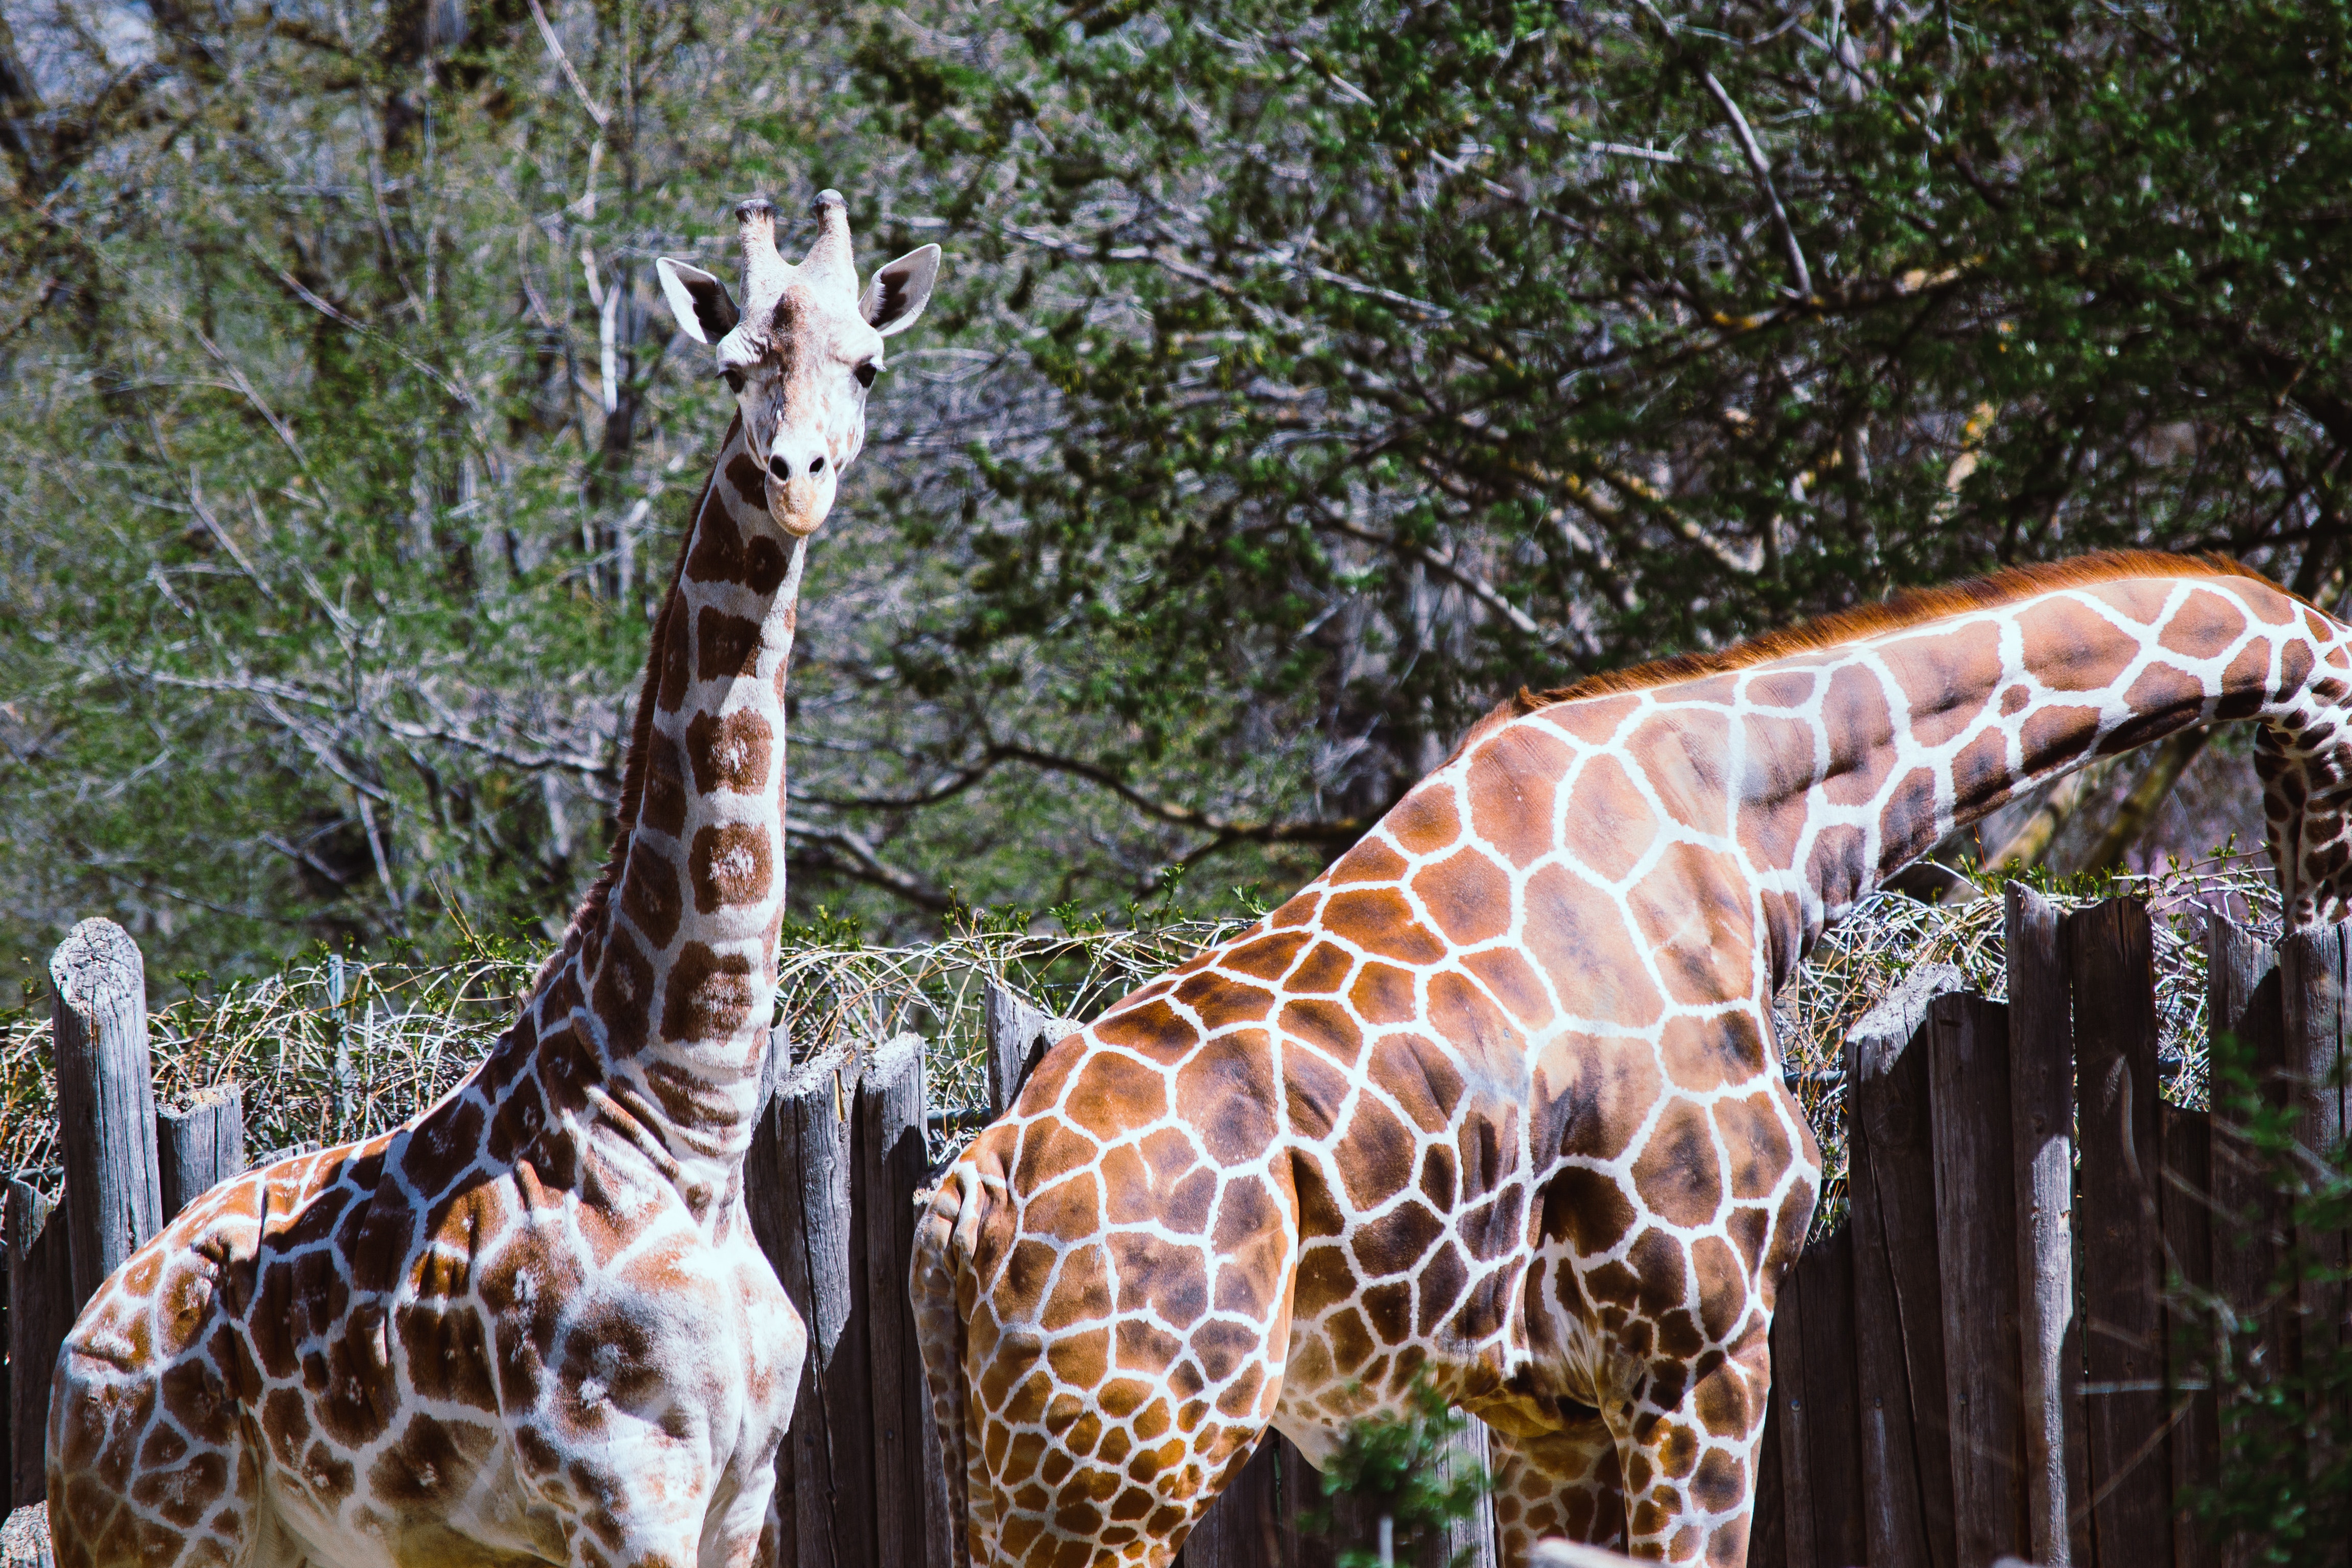 Two giraffes are near a wooden fence in the zoo photo